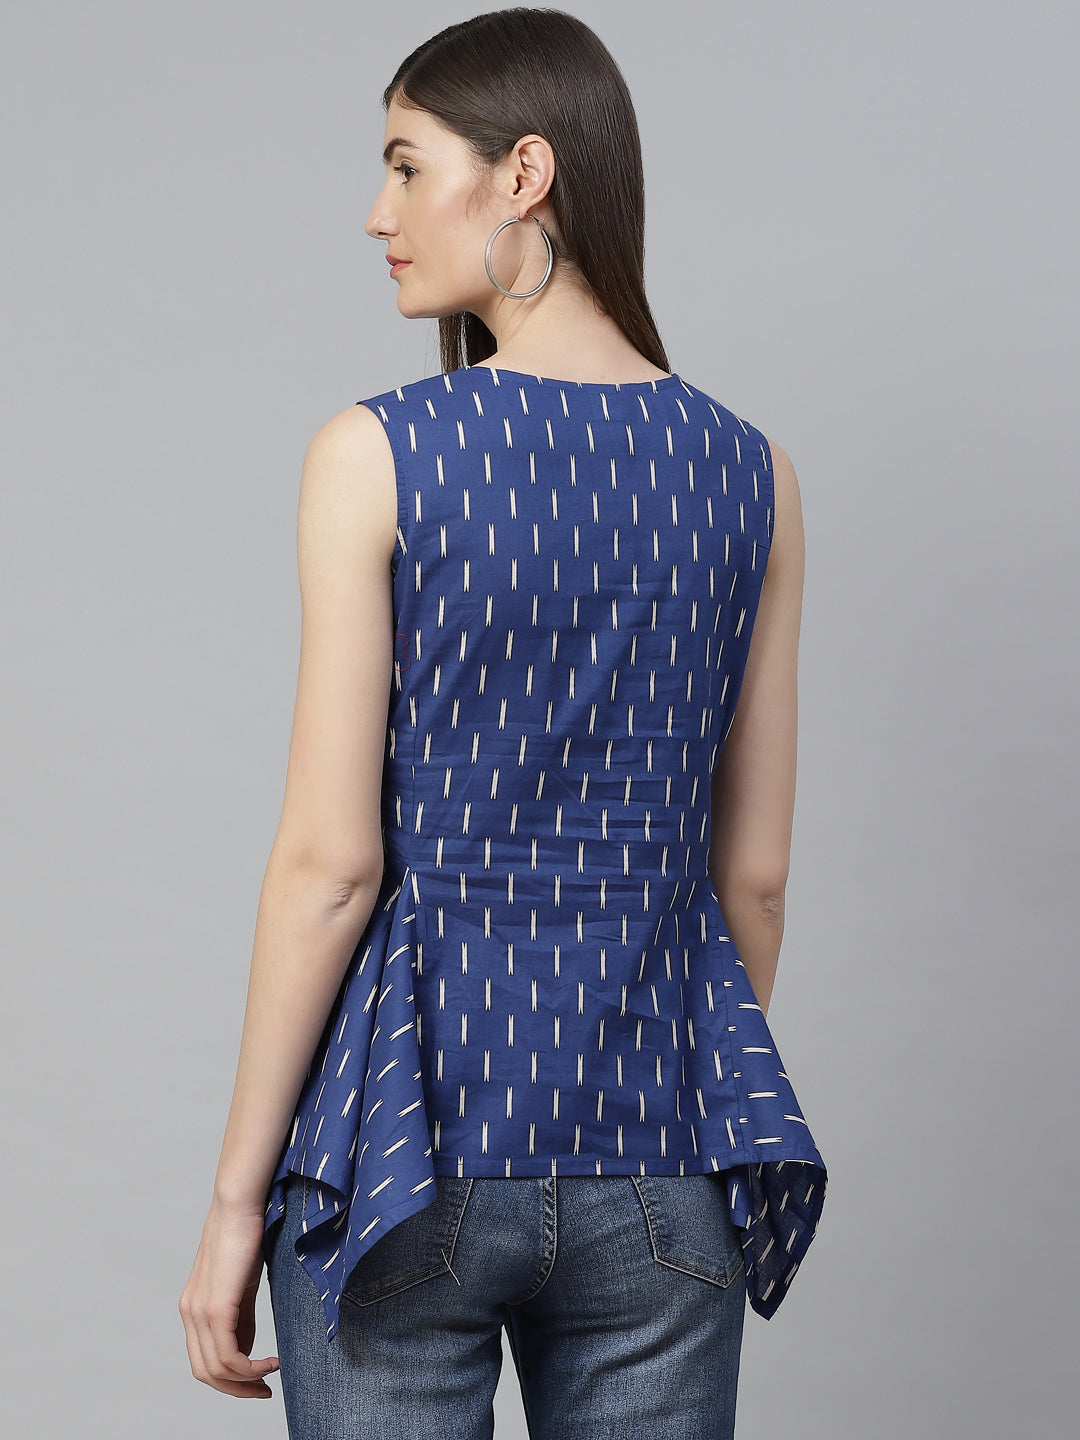  Cotton Ikat Printed Embroidered Regular Top (Blue)